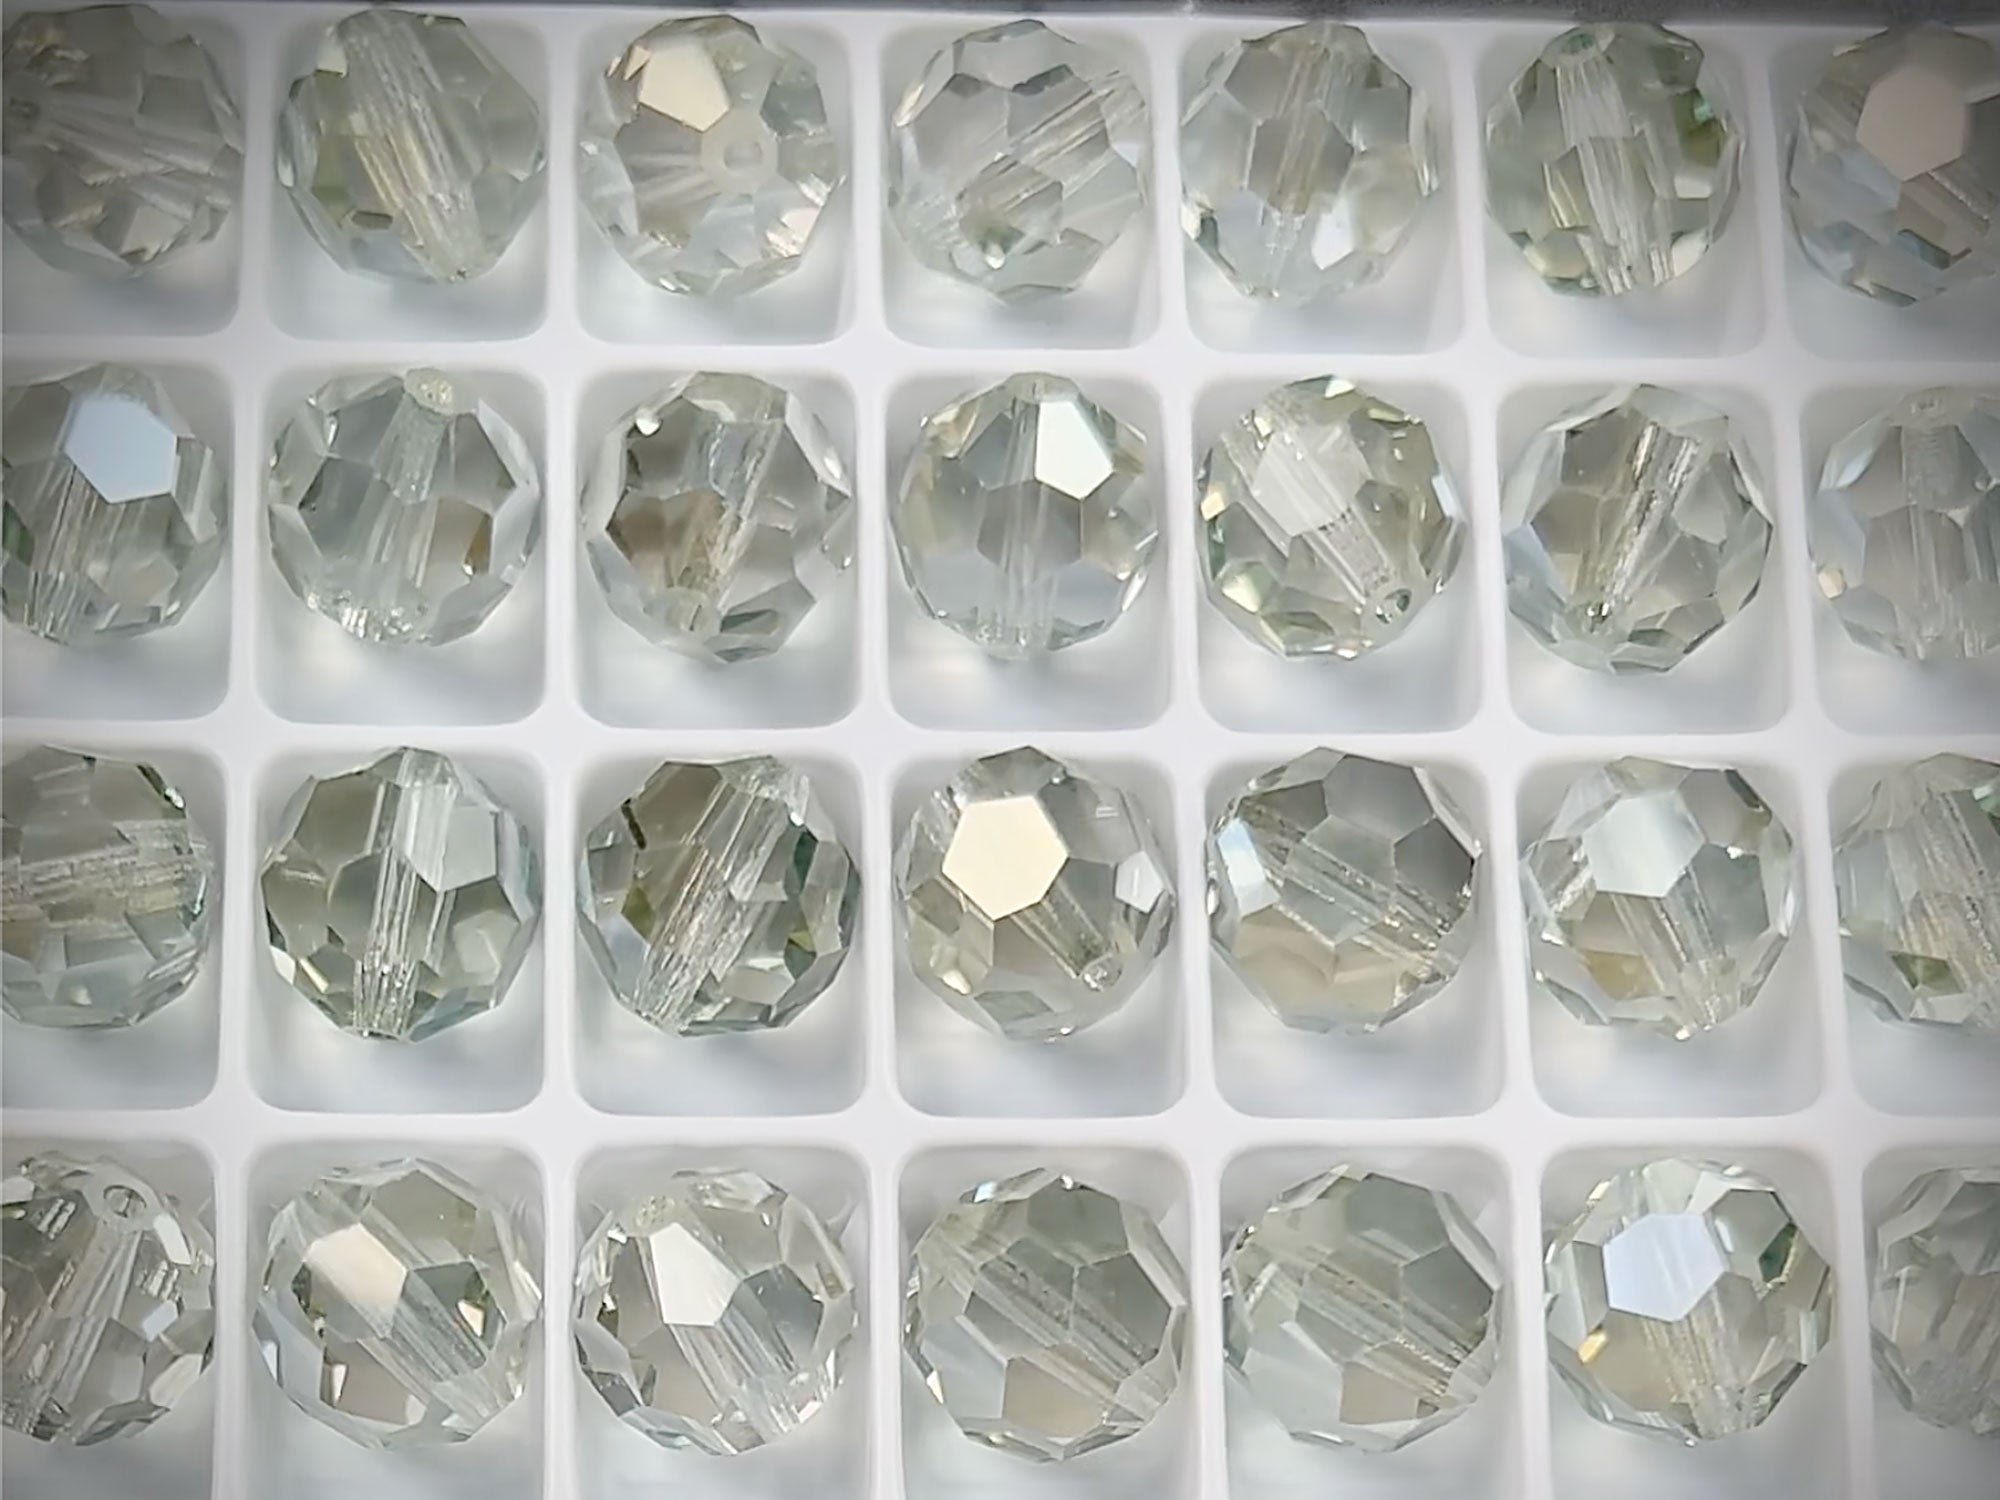 Crystal Viridian coated, Czech Machine Cut Round Crystal Beads, sizes 8mm, 12mm clear crystals silvery green coated